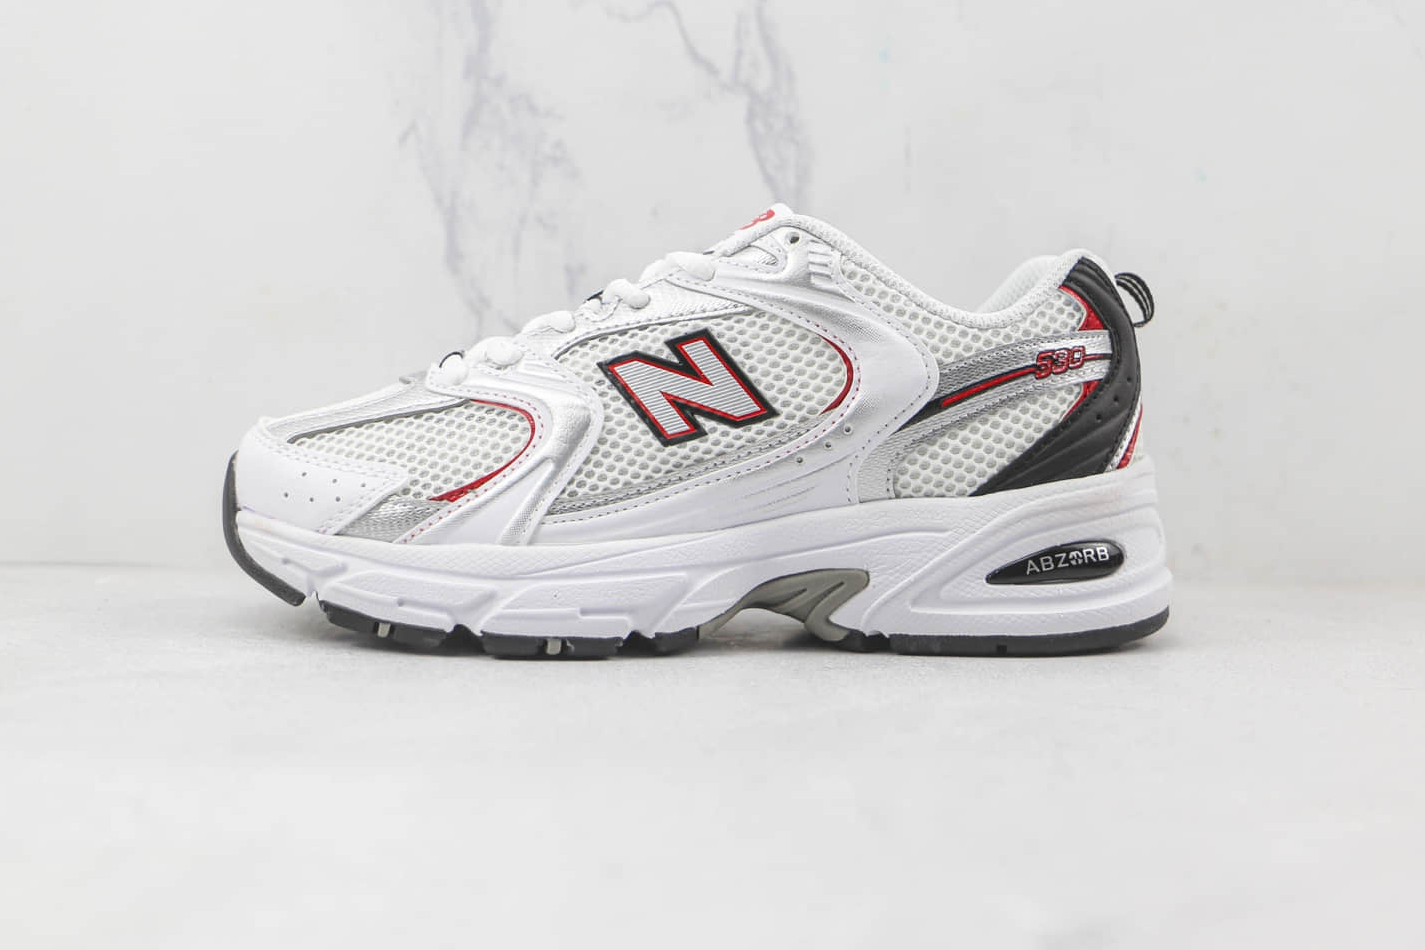 New Balance 530v2 Retro 'White Silver Red' MR530SA - Stylish and Classic Sneakers